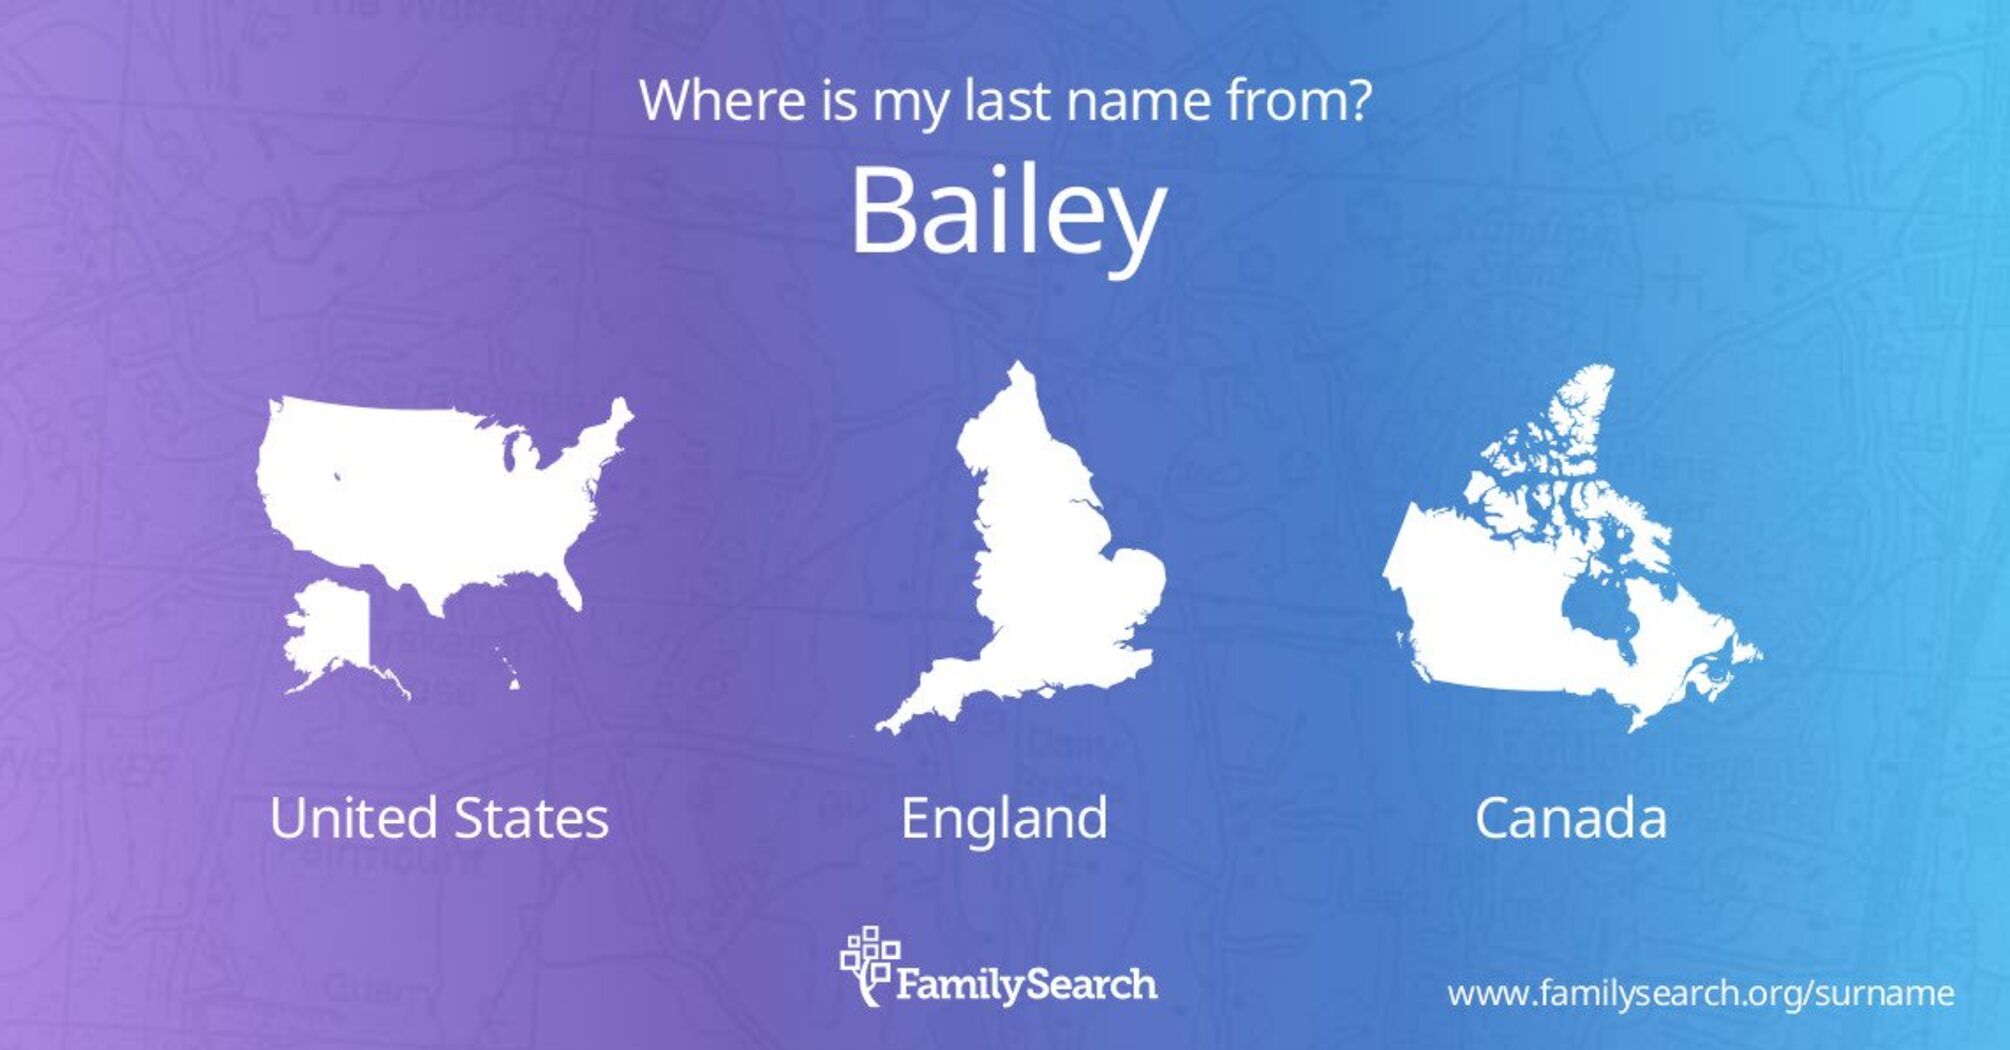 What's the origin of surname Bailey